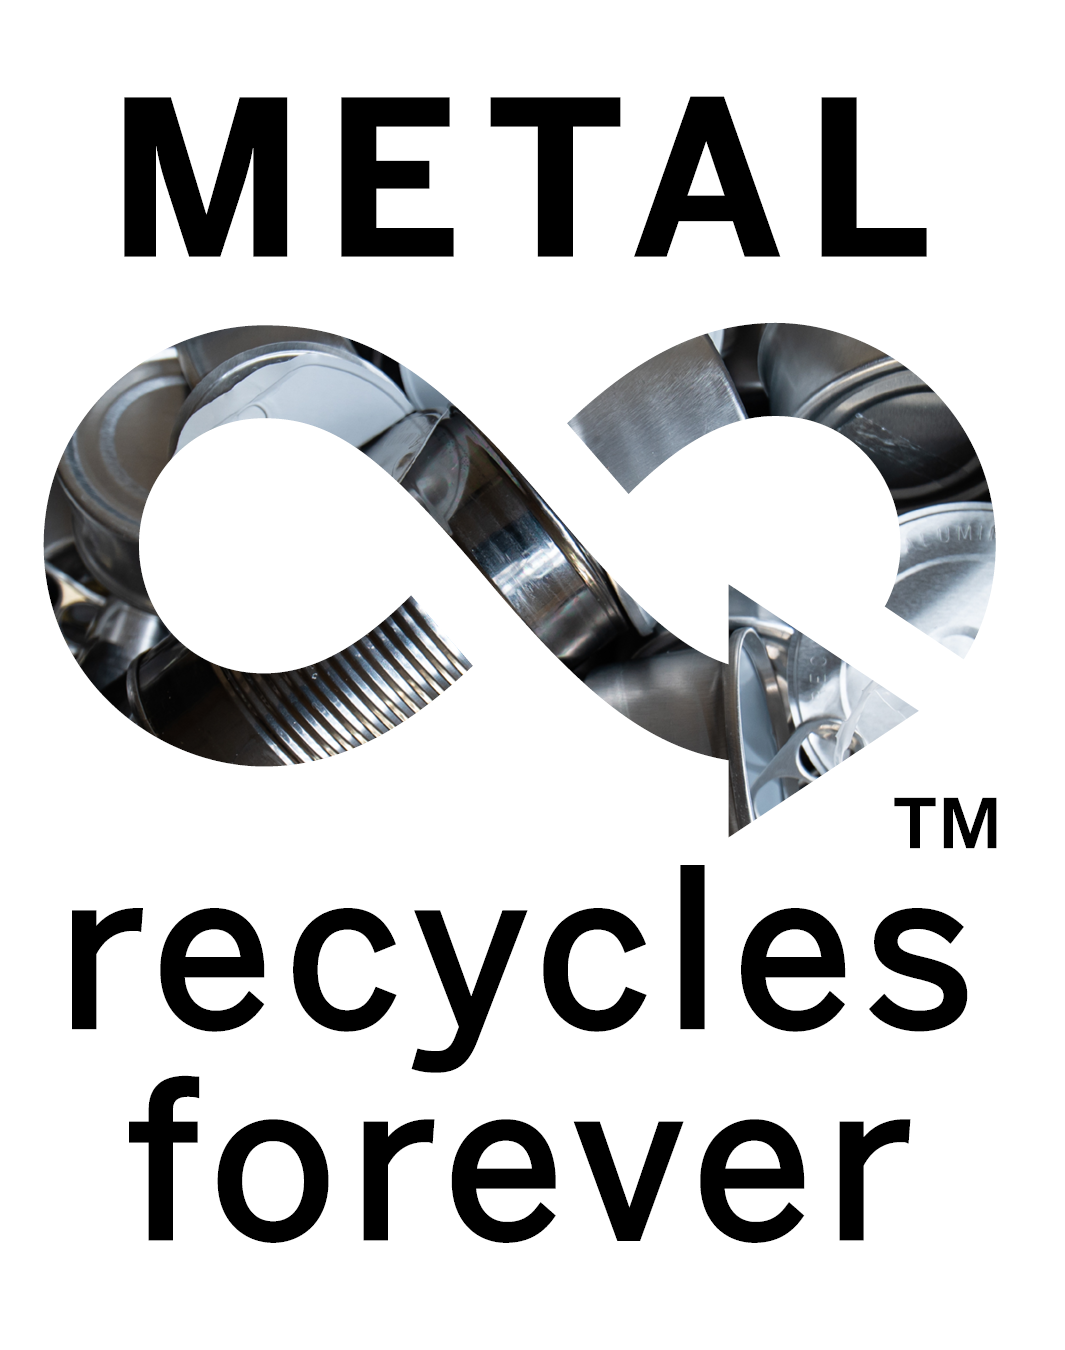 Image of metal recycles forever symbol. 